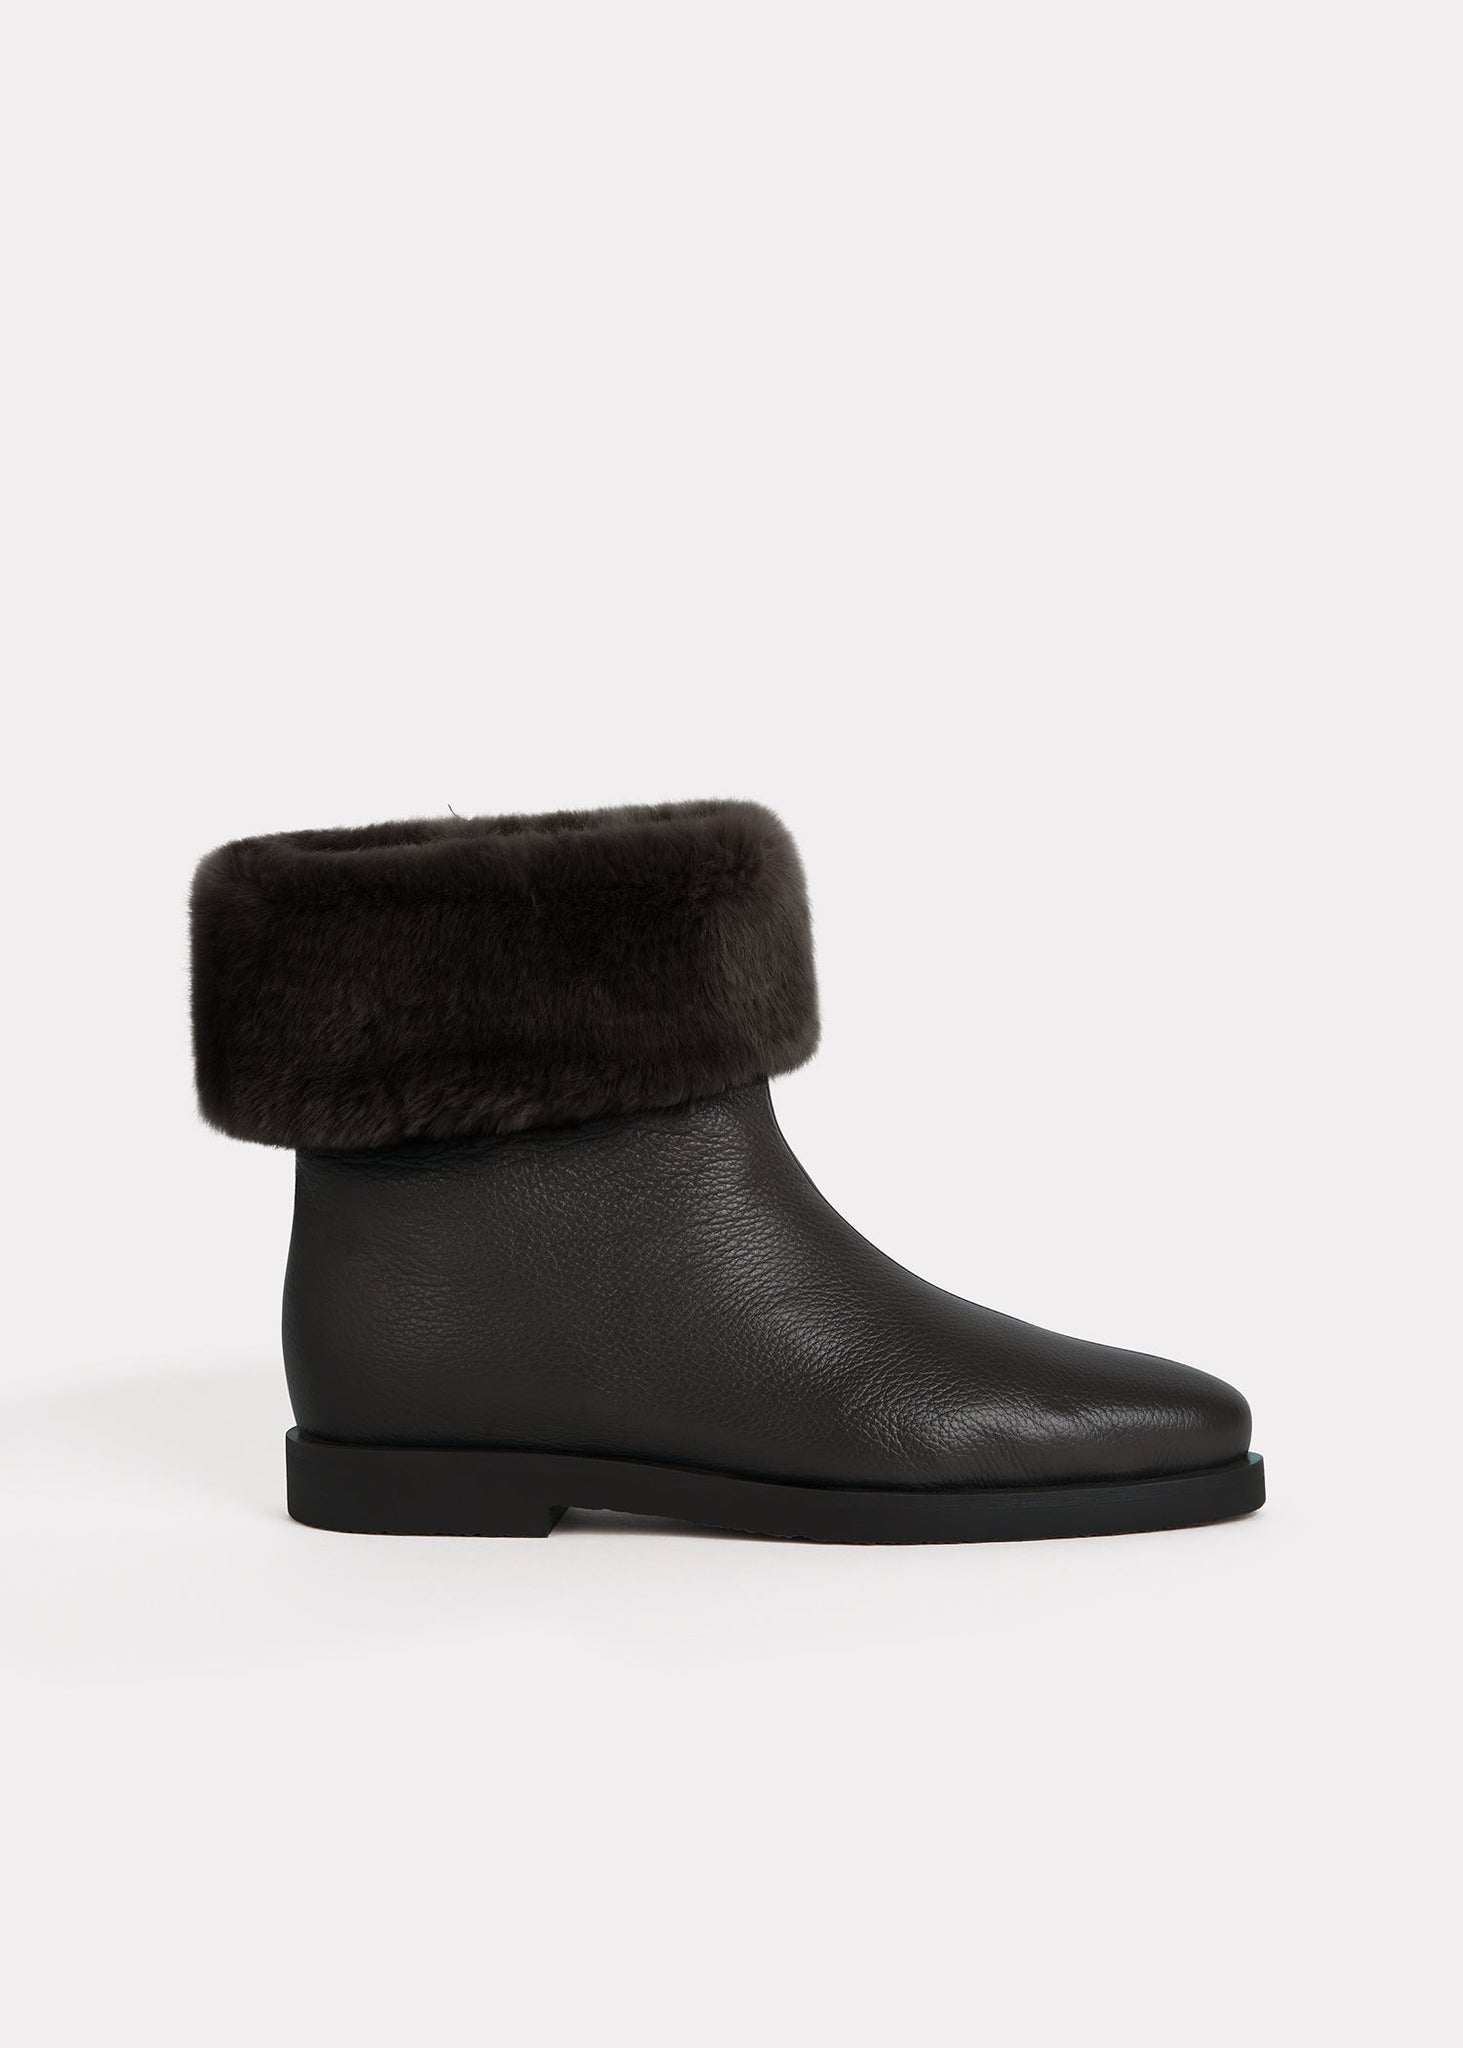 The Off-Duty Boot dark brown